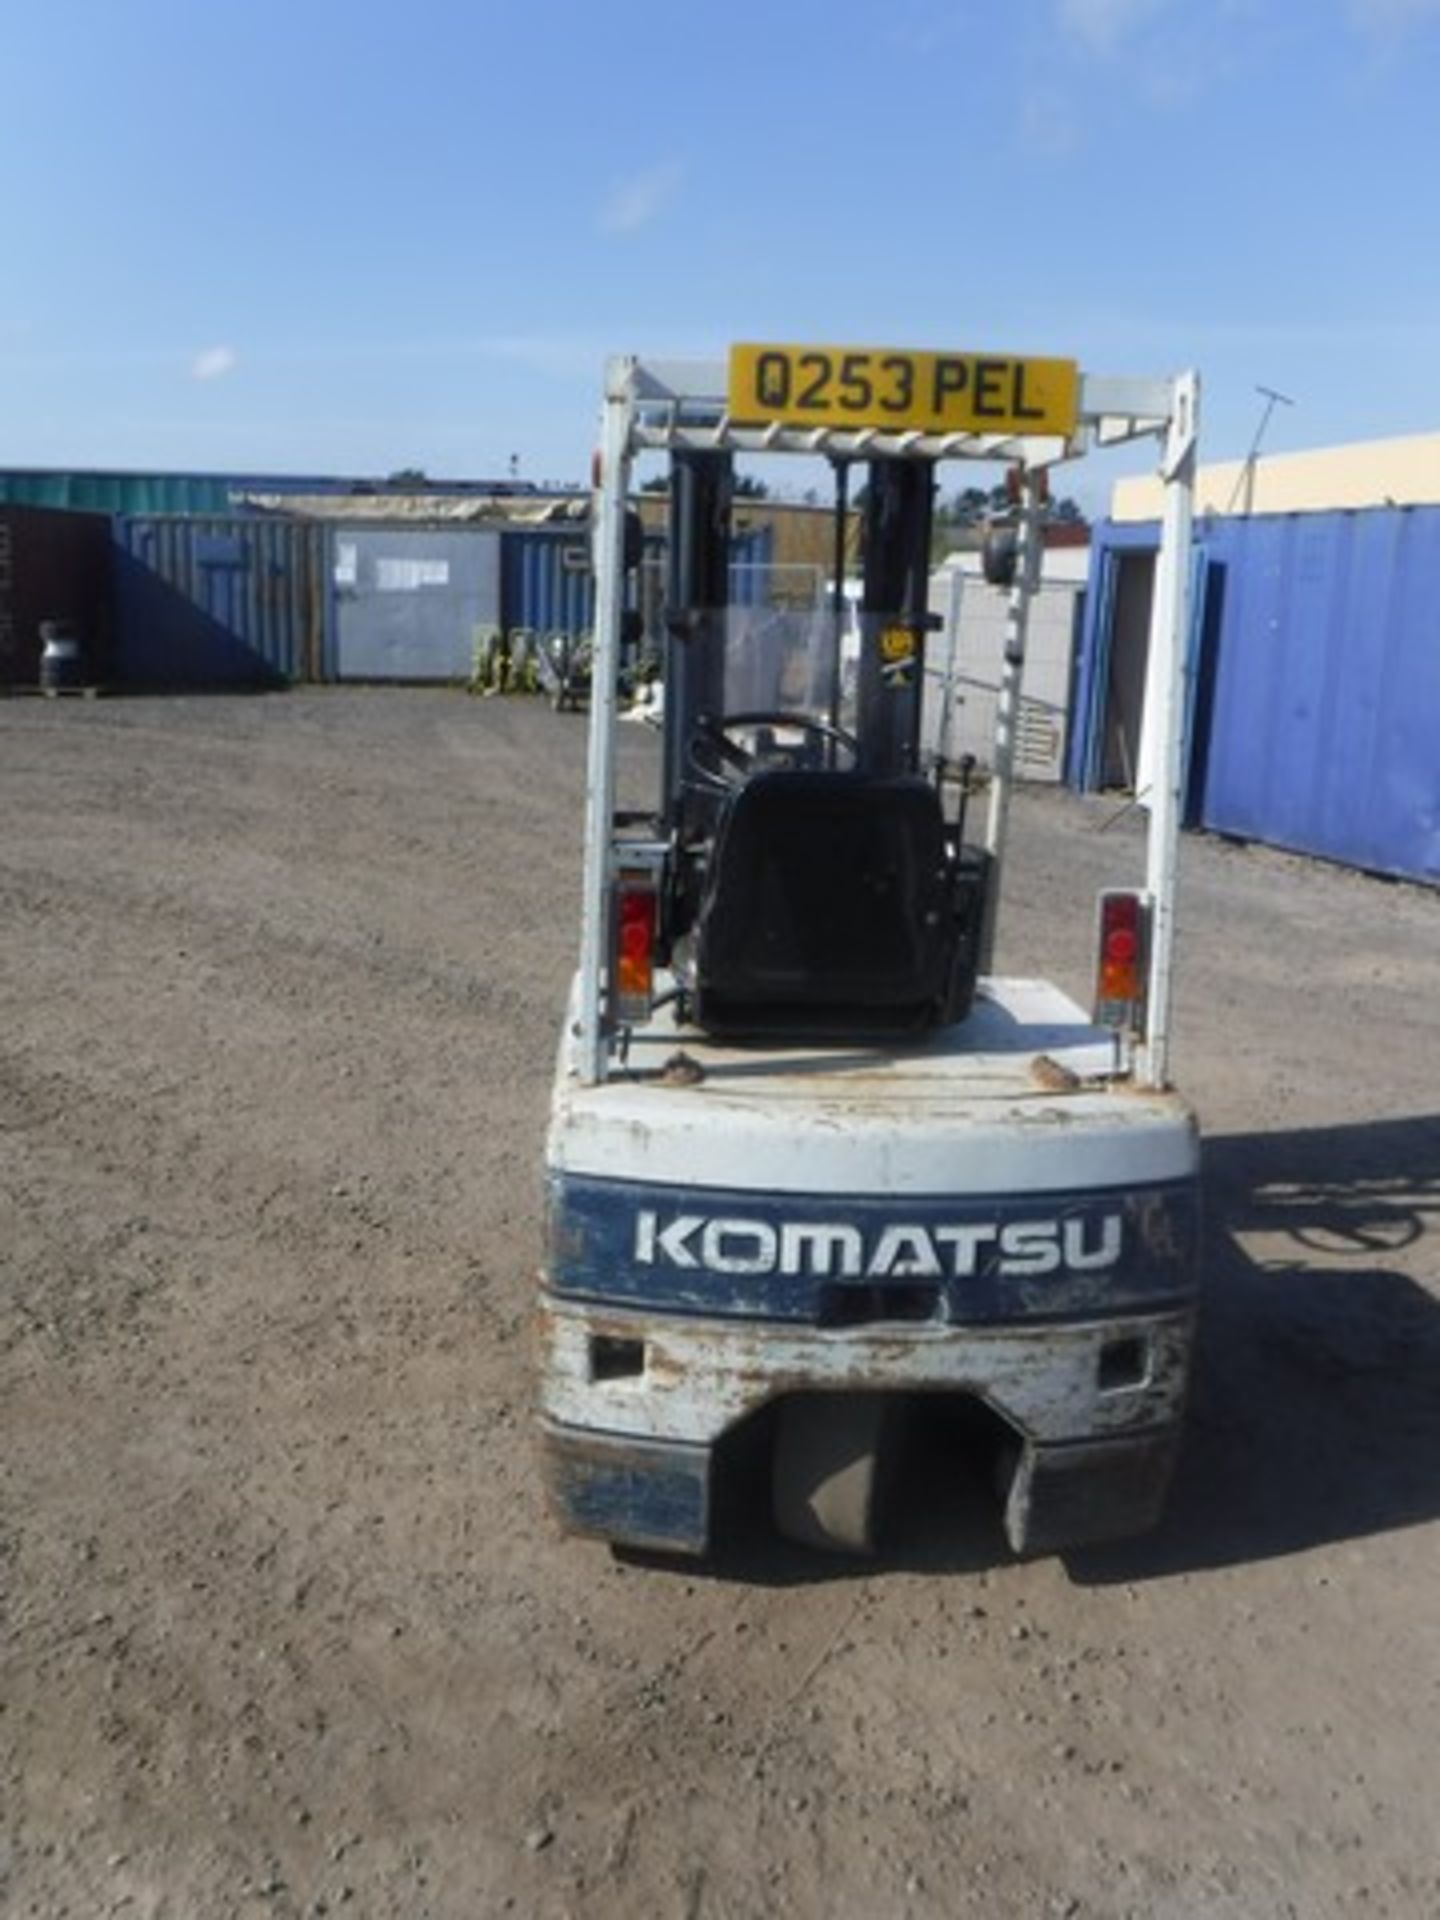 KOMATSU 18M ELECTRIC FORKLIFT 5082HRS (NOT VERIFIED) C/W CHARGER ASSET NO - 727-3301 - Image 3 of 7